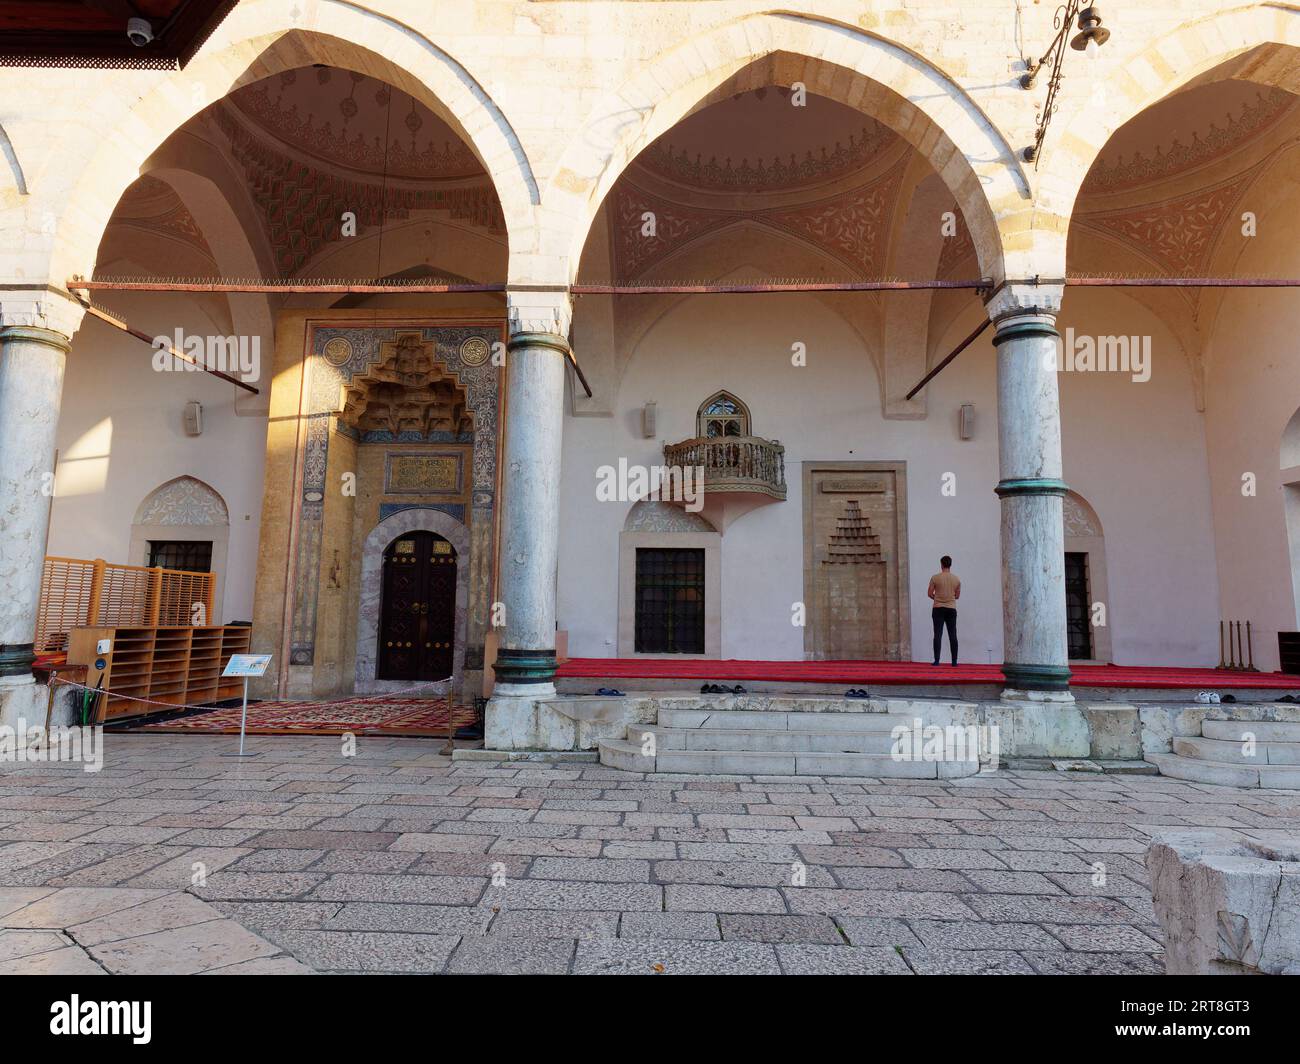 Gazi Husrev-beg Mosque with exterior pray area including the Mihrab, in the city of Sarajevo, Bosnia and Herzegovina, September 11, 2023 Stock Photo